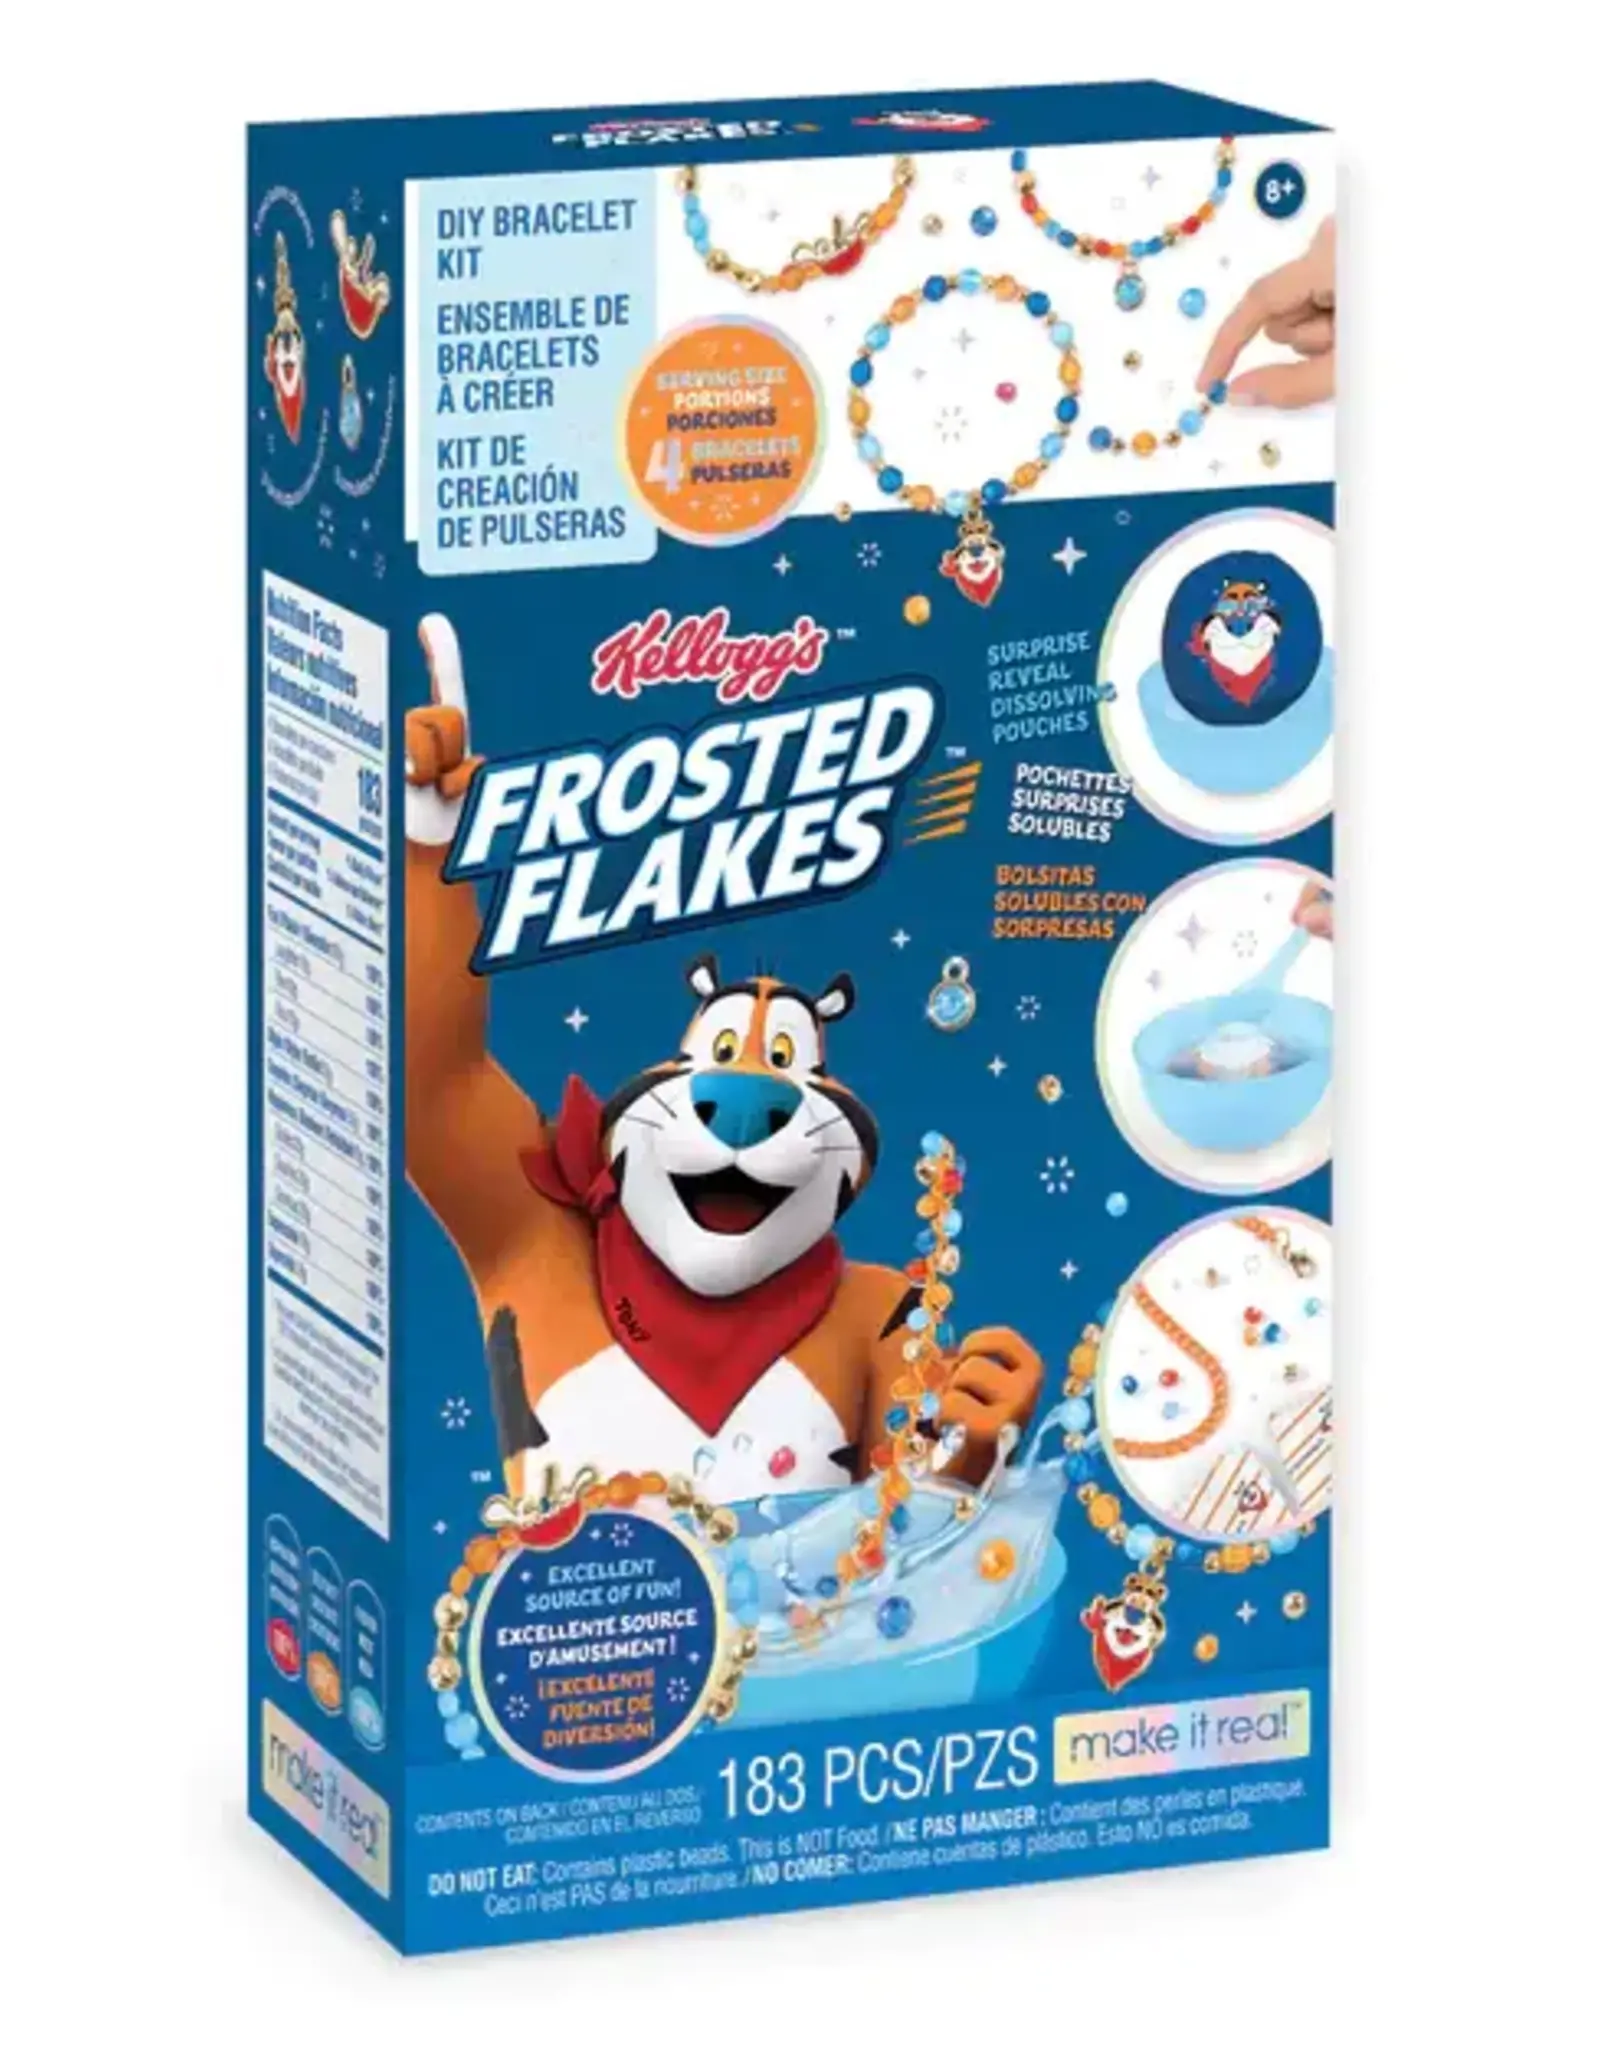 Cereal-sly Cute Kellogg's Frosted Flakes - Toy Market